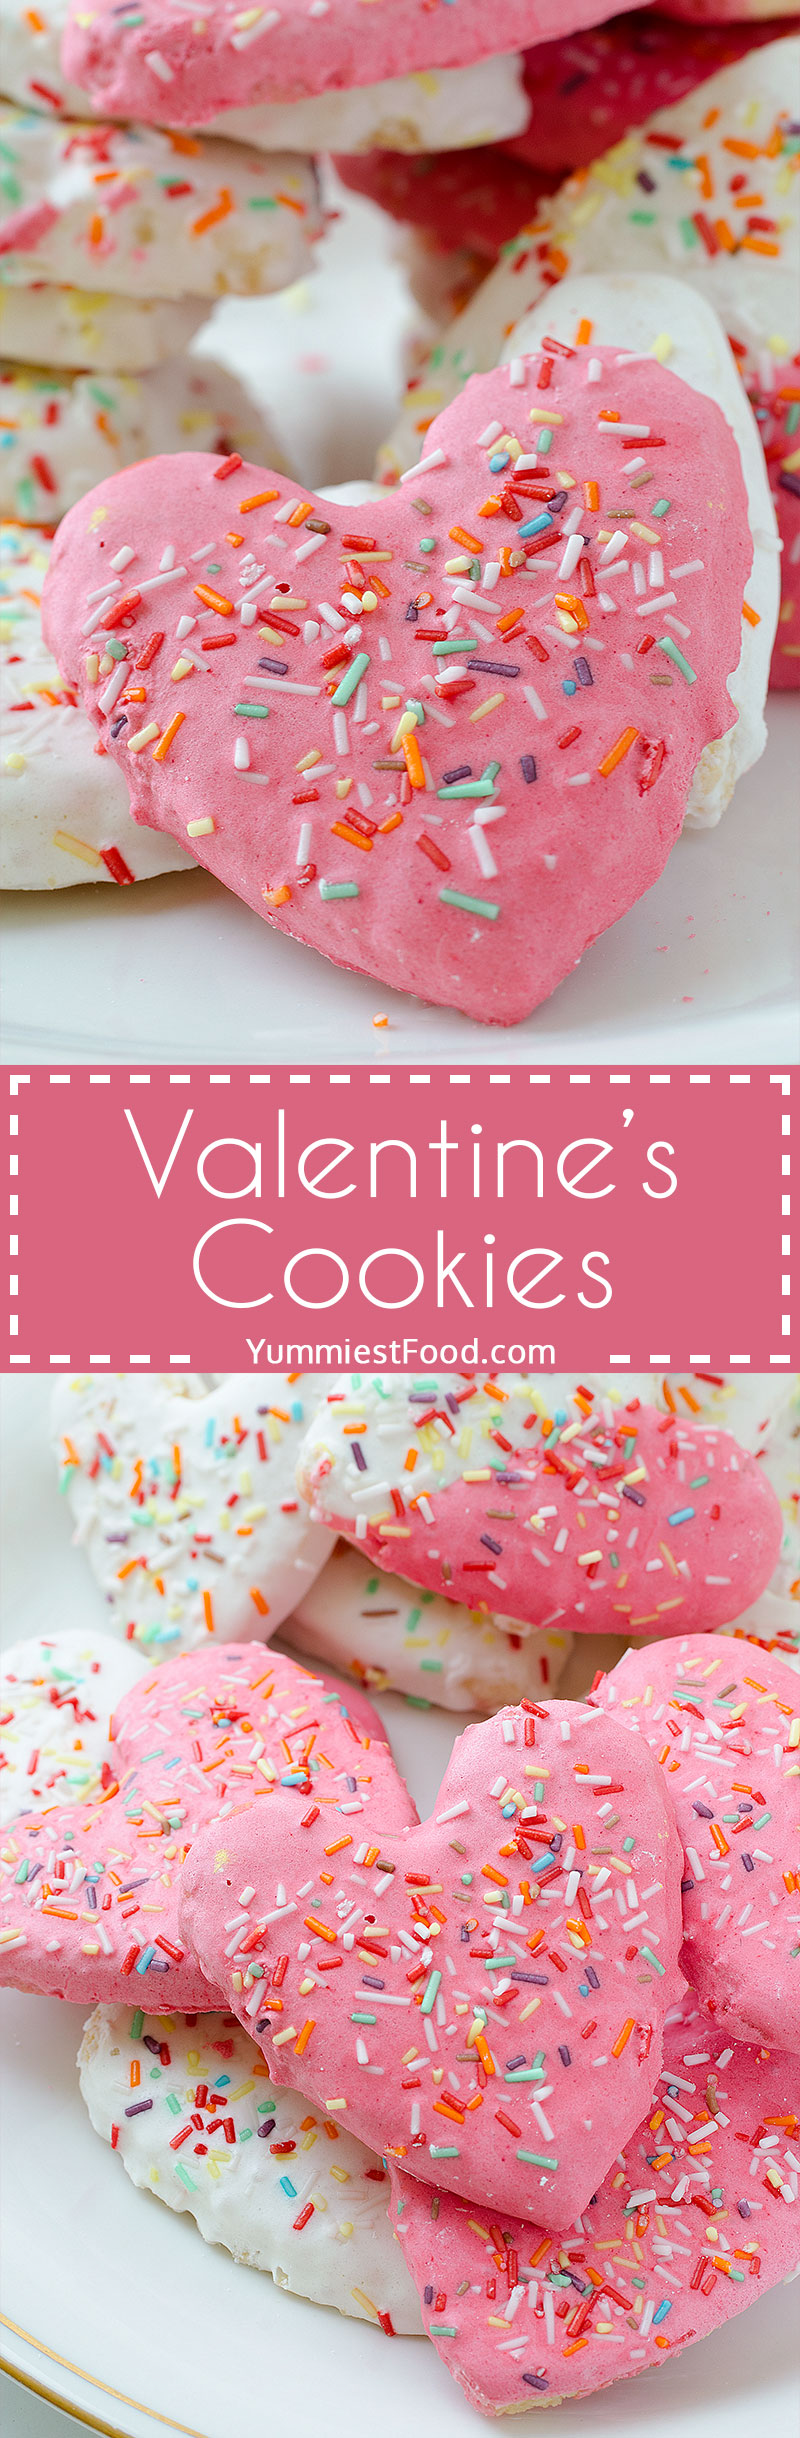 Valentine’s Cookies - It is Valentine’s day, let it be magical, romantic and unforgettable! With Valentine’s cookies you will bring joy in your home